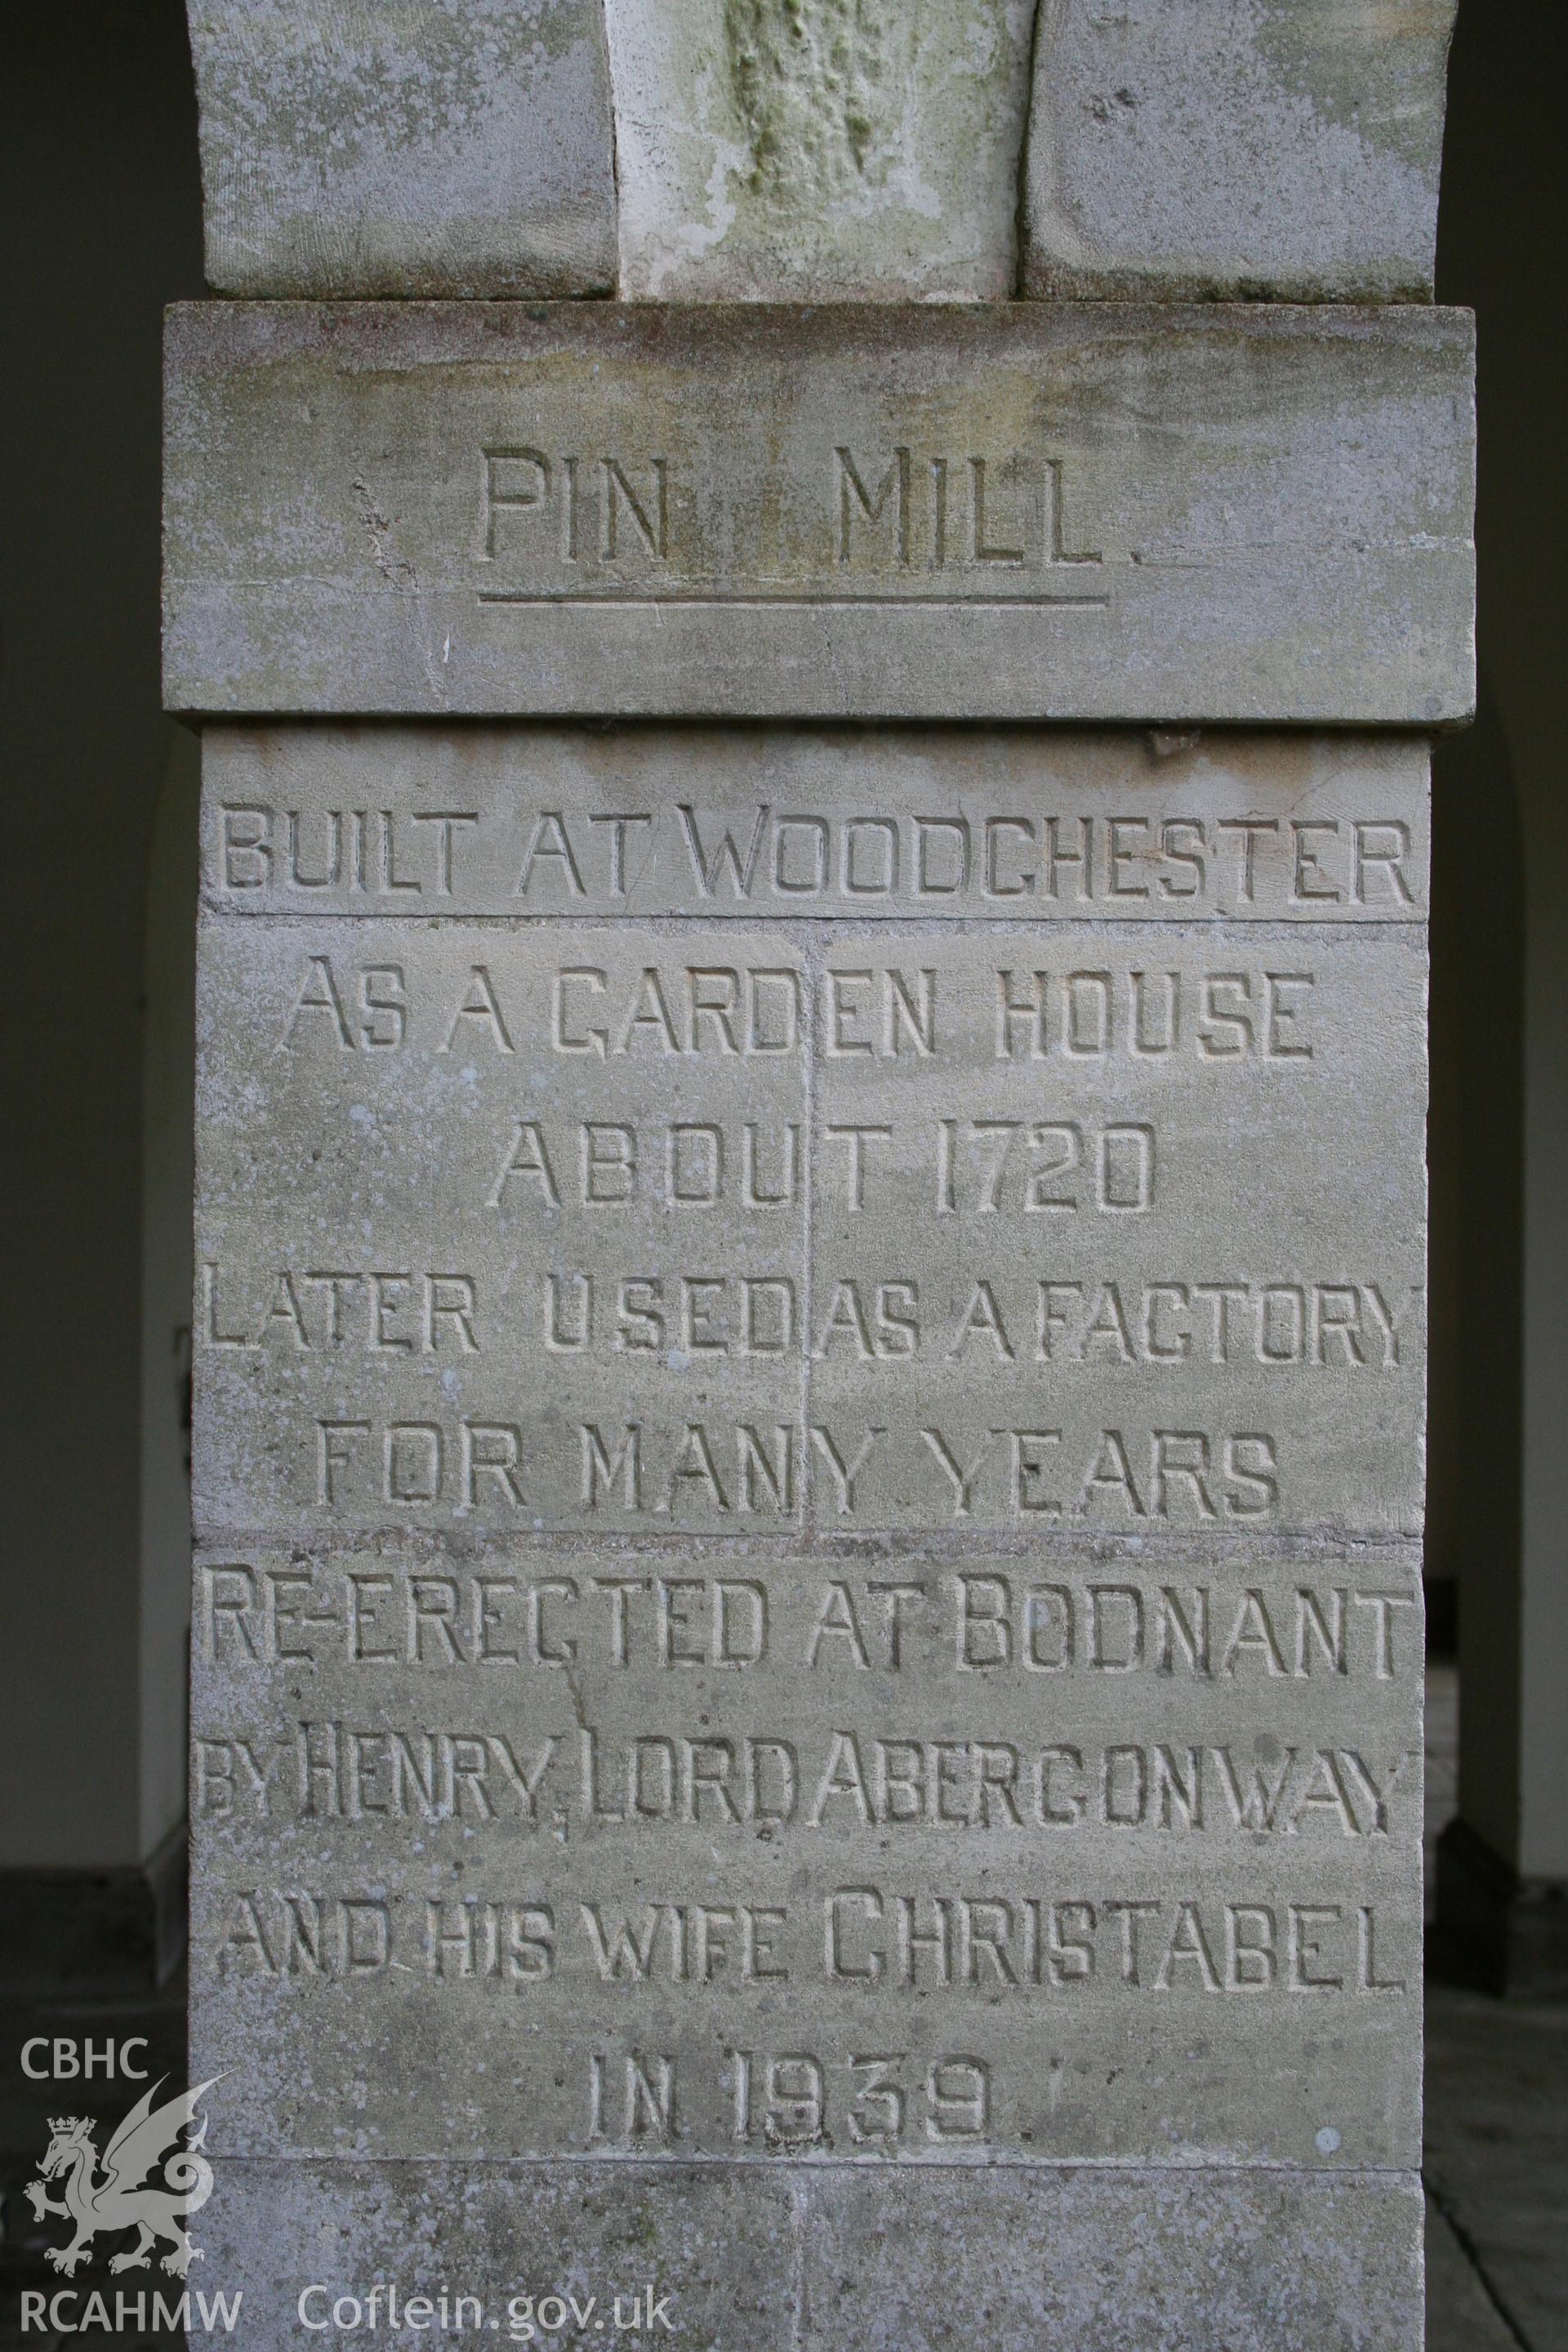 Building history carved into one of the piers in the Pin Mill (nprn 41168).